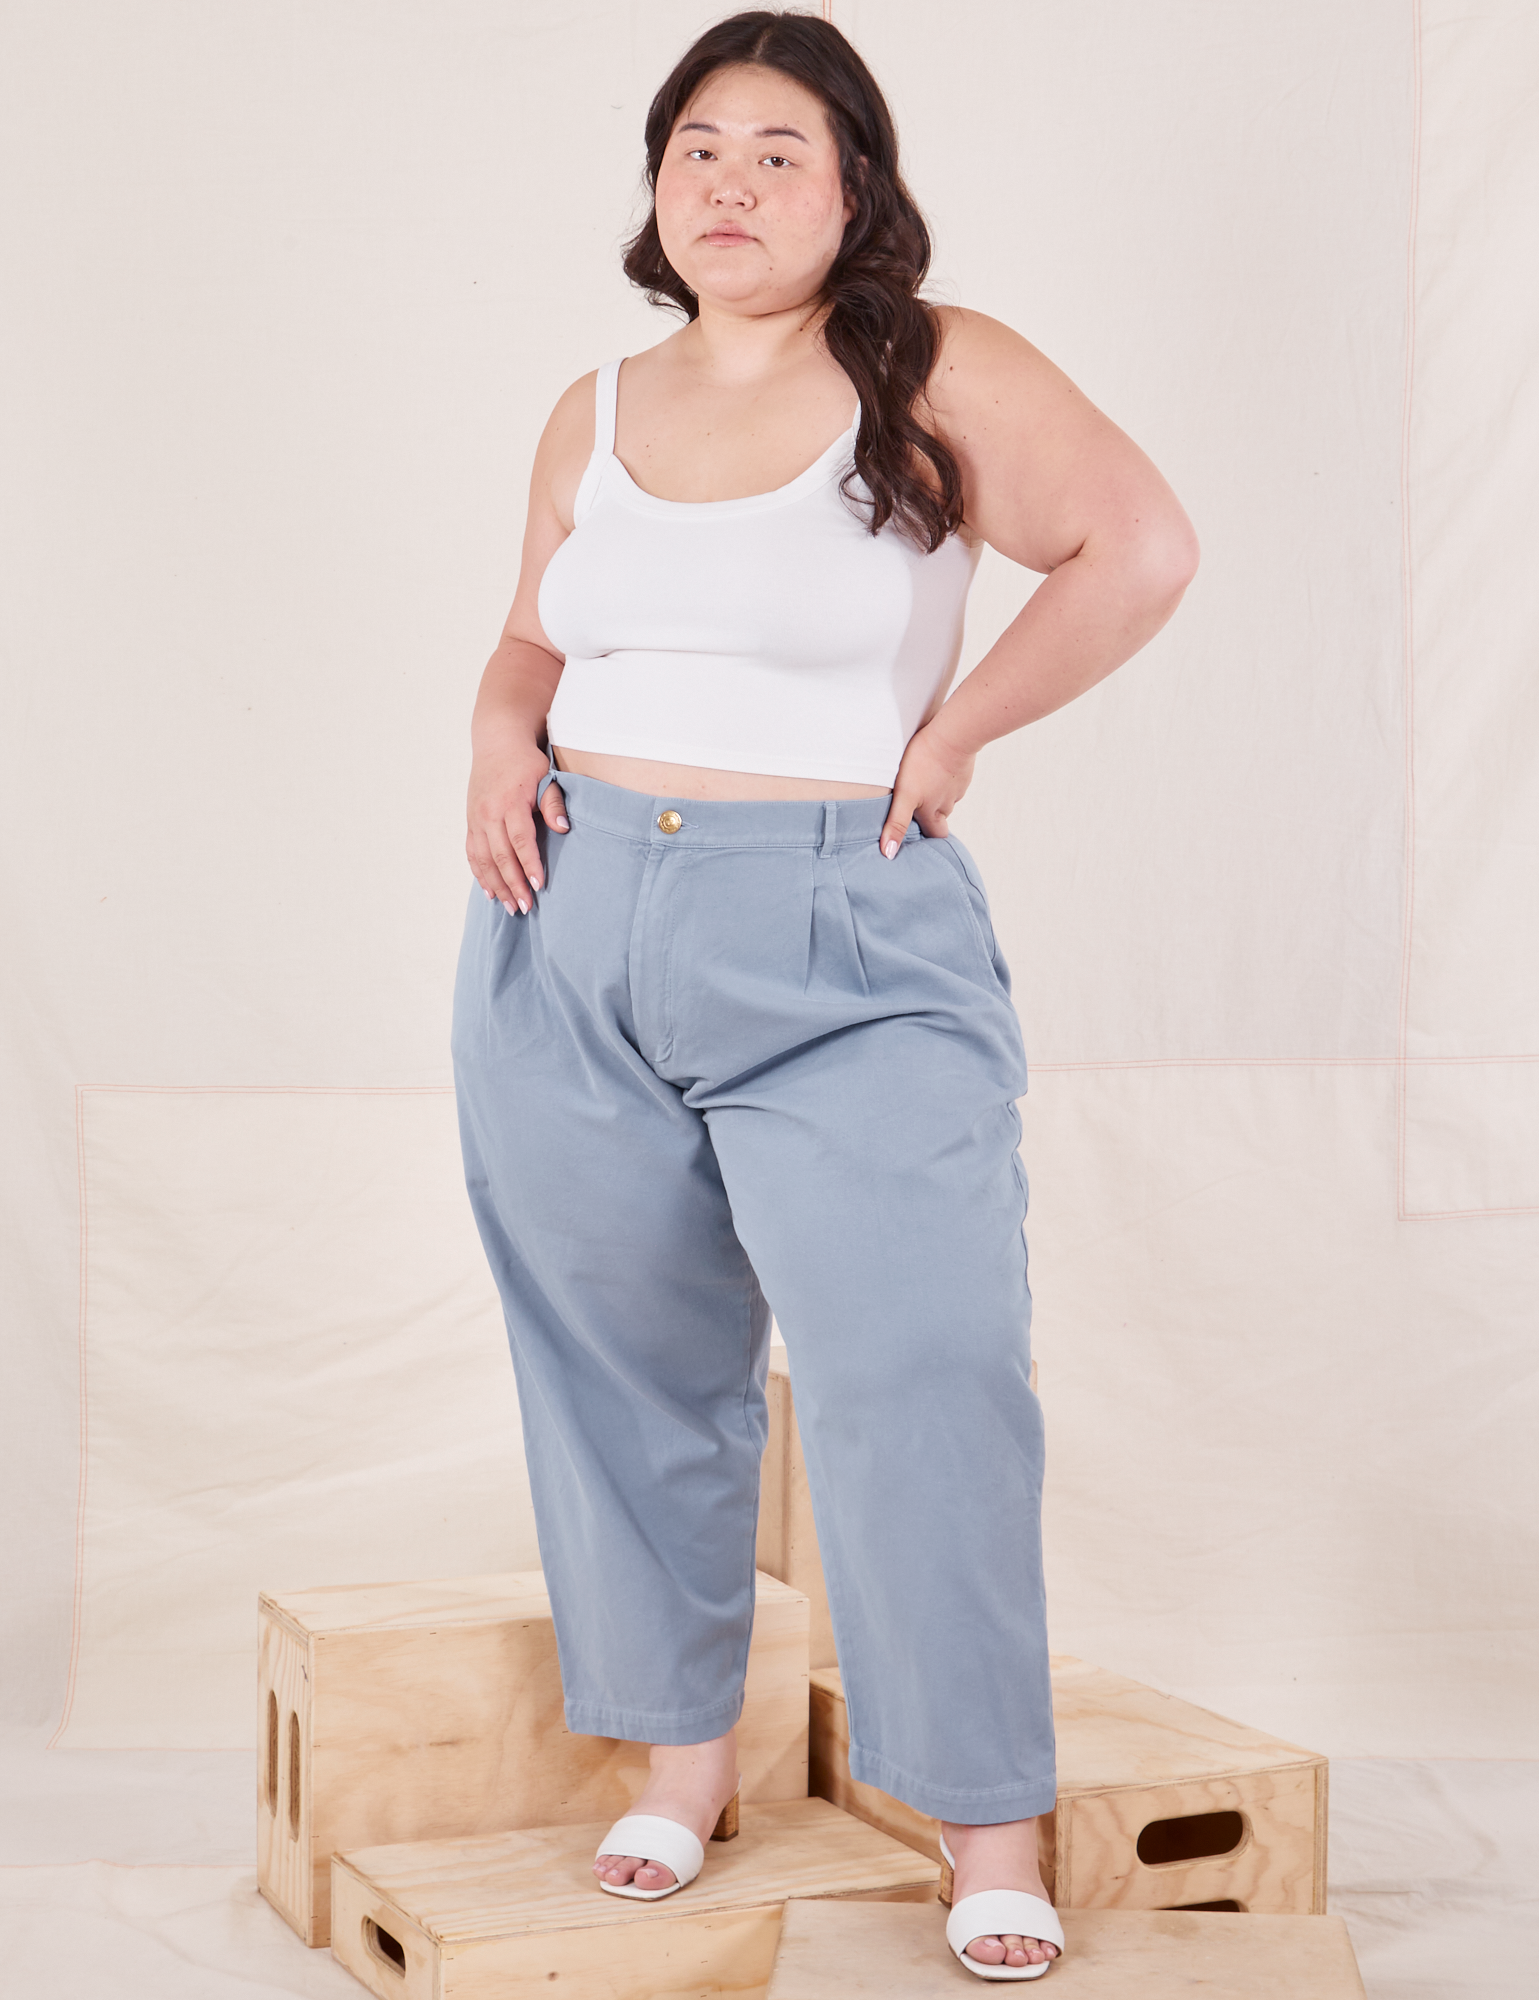 Ashley is 5&#39;7&quot; and wearing 1XL Petite Organic Trousers in Periwinkle paired with vintage off-white Cami